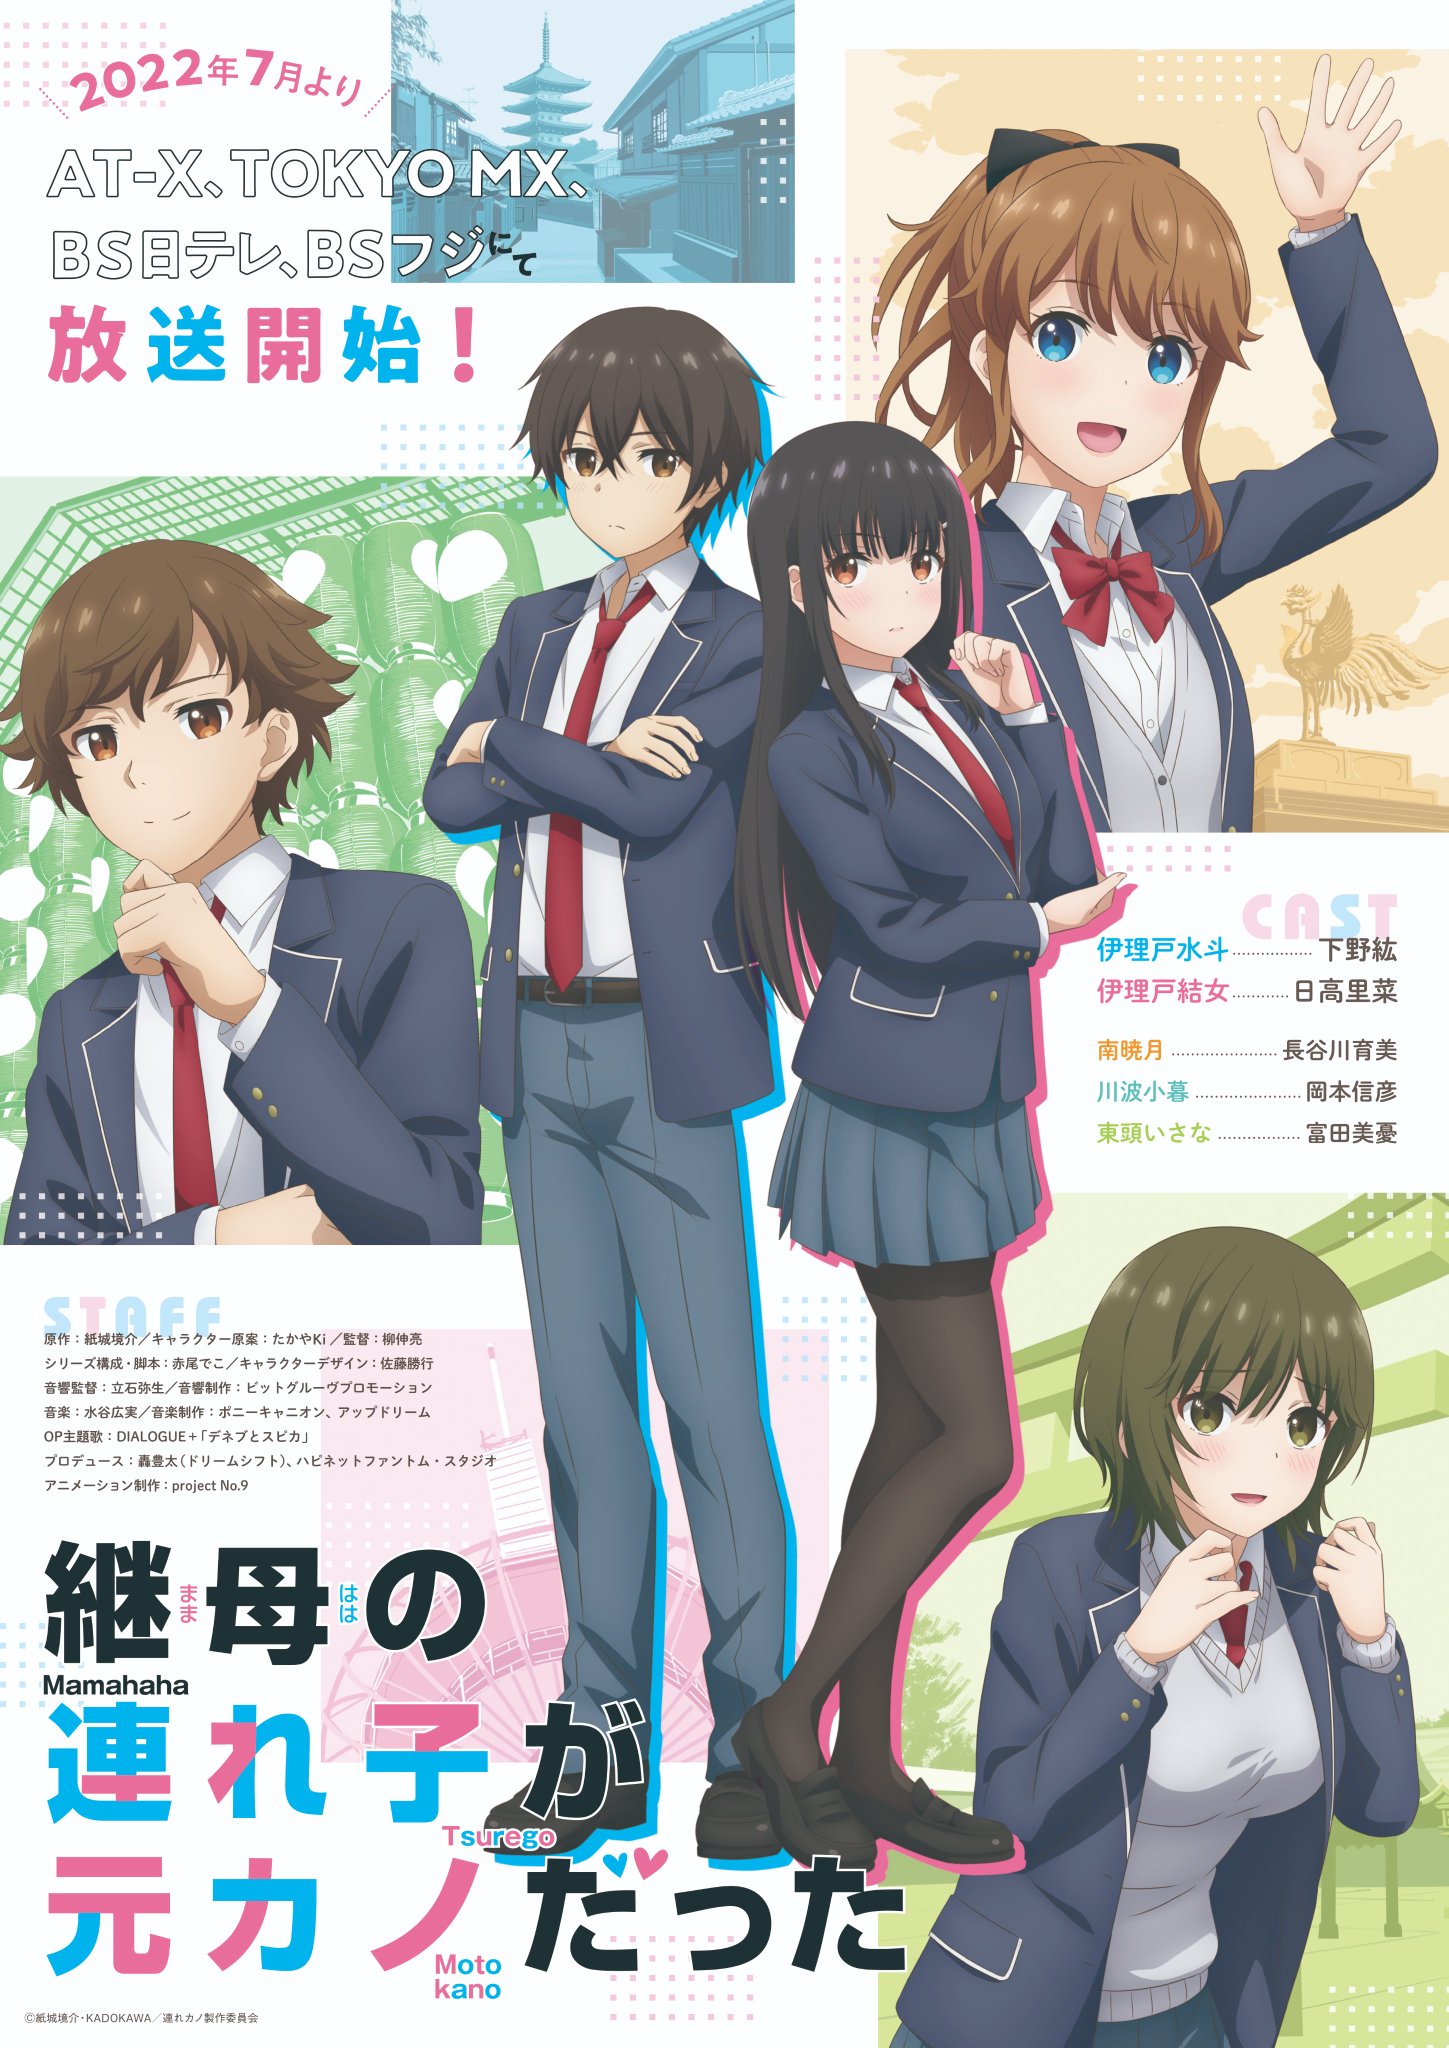 Yume said Call me Onee-chan to Mizuto in ep 1 from My Stepmom's Daughter Is  My Ex or Mamahaha no Tsurego ga Motokano datta anime | Poster